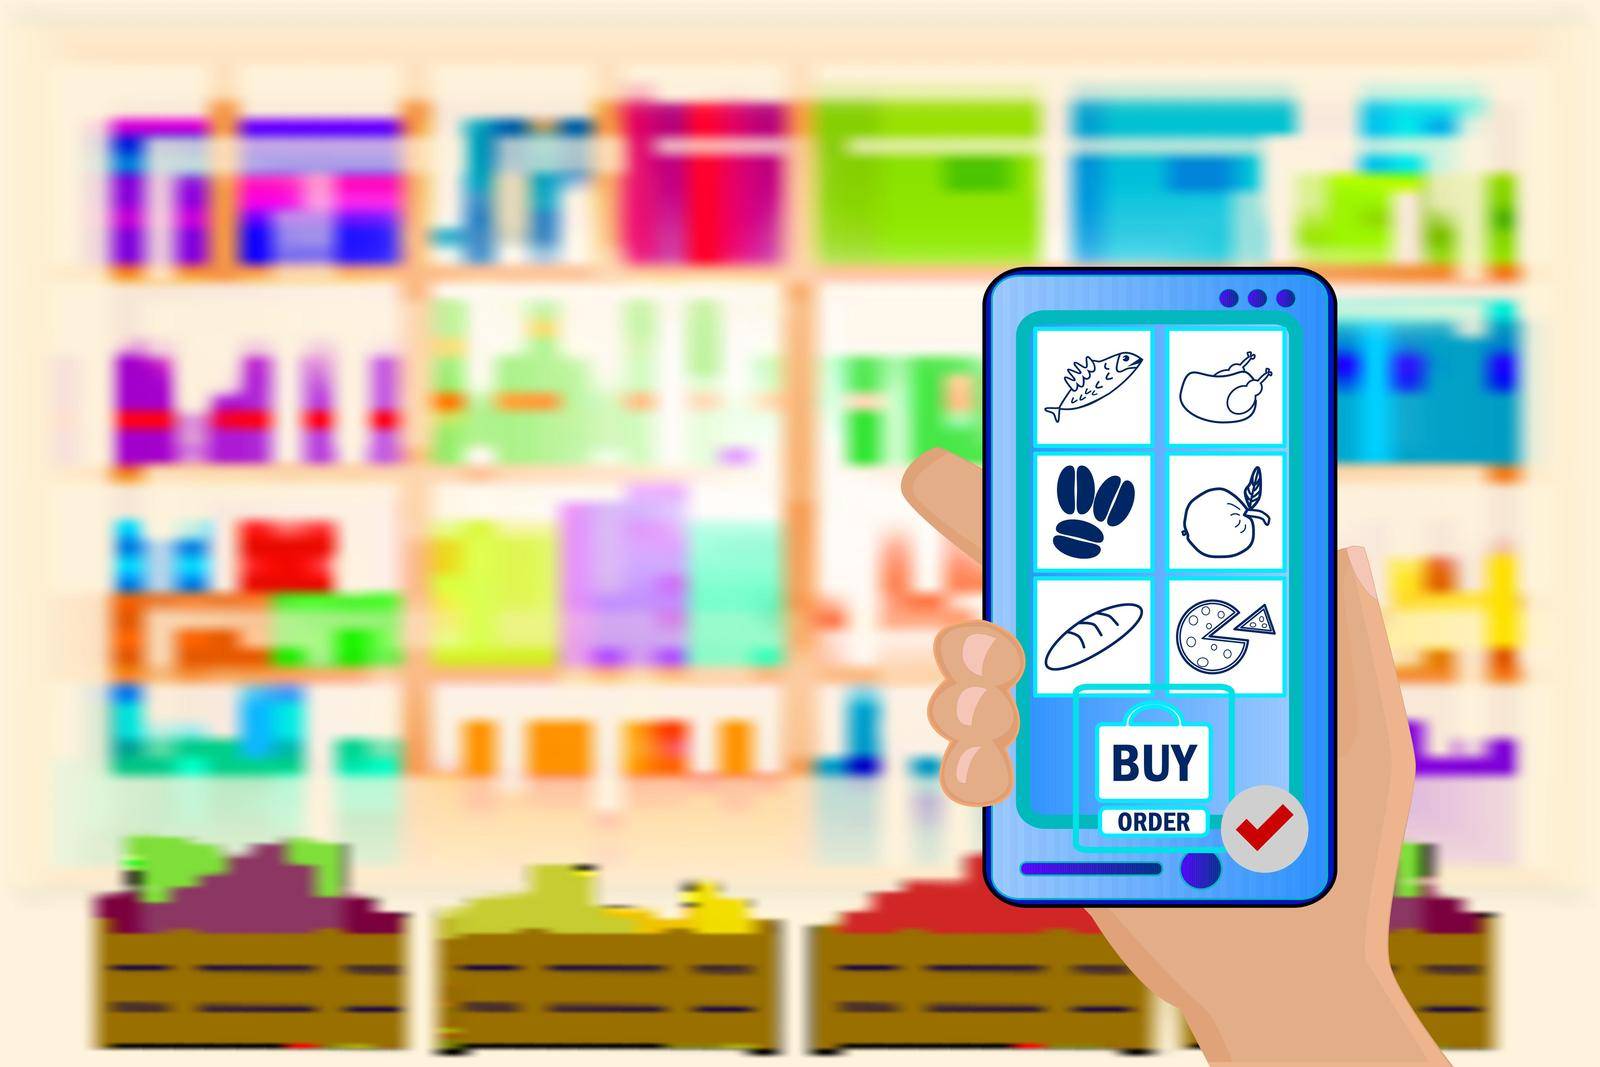 Supermarket interior. Mobile app for ordering food. Online store, e-commerce concept. Safety delivery. Supply service. Stock vector illustration